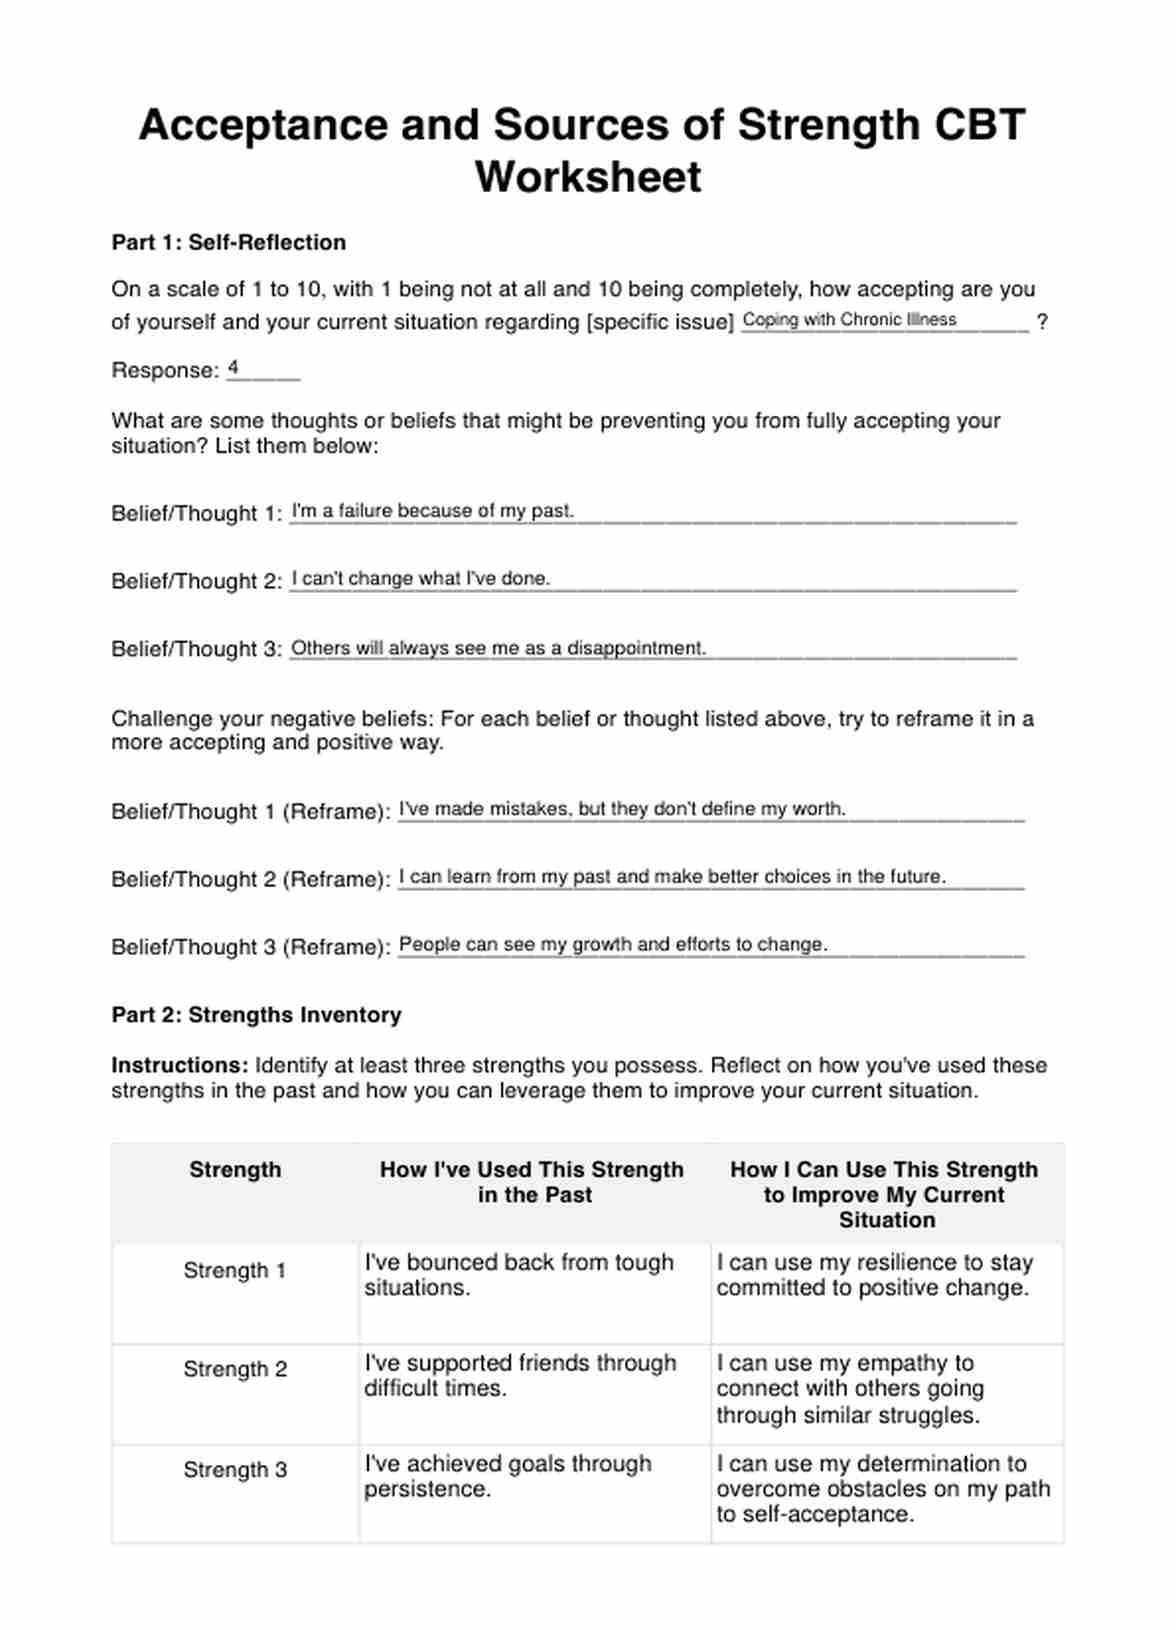 Acceptance and Sources of Strength CBT Worksheet PDF Example